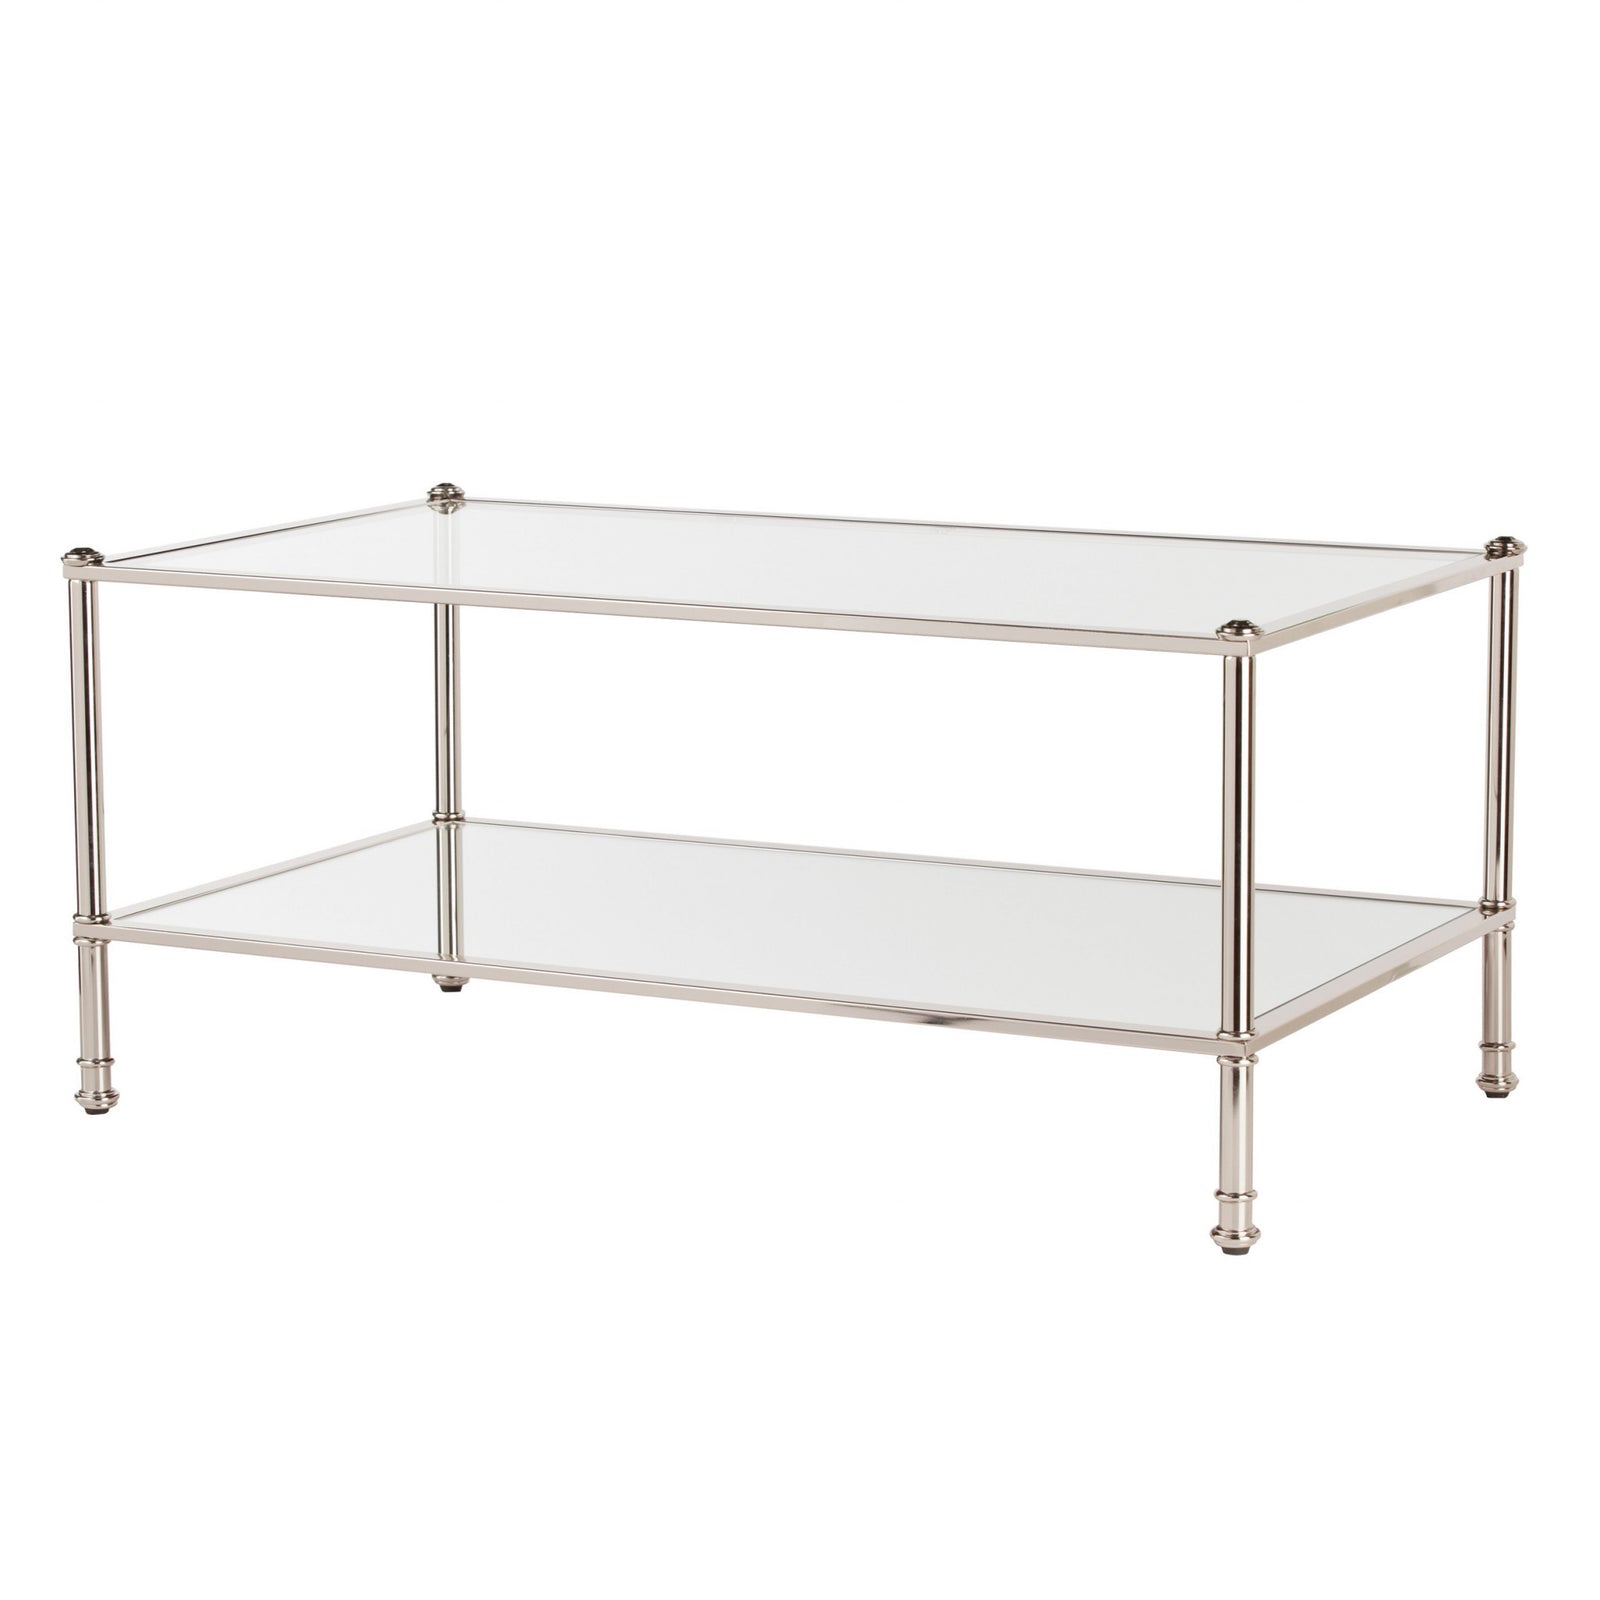 43" Silver Mirrored And Metal Rectangular Mirrored Coffee Table